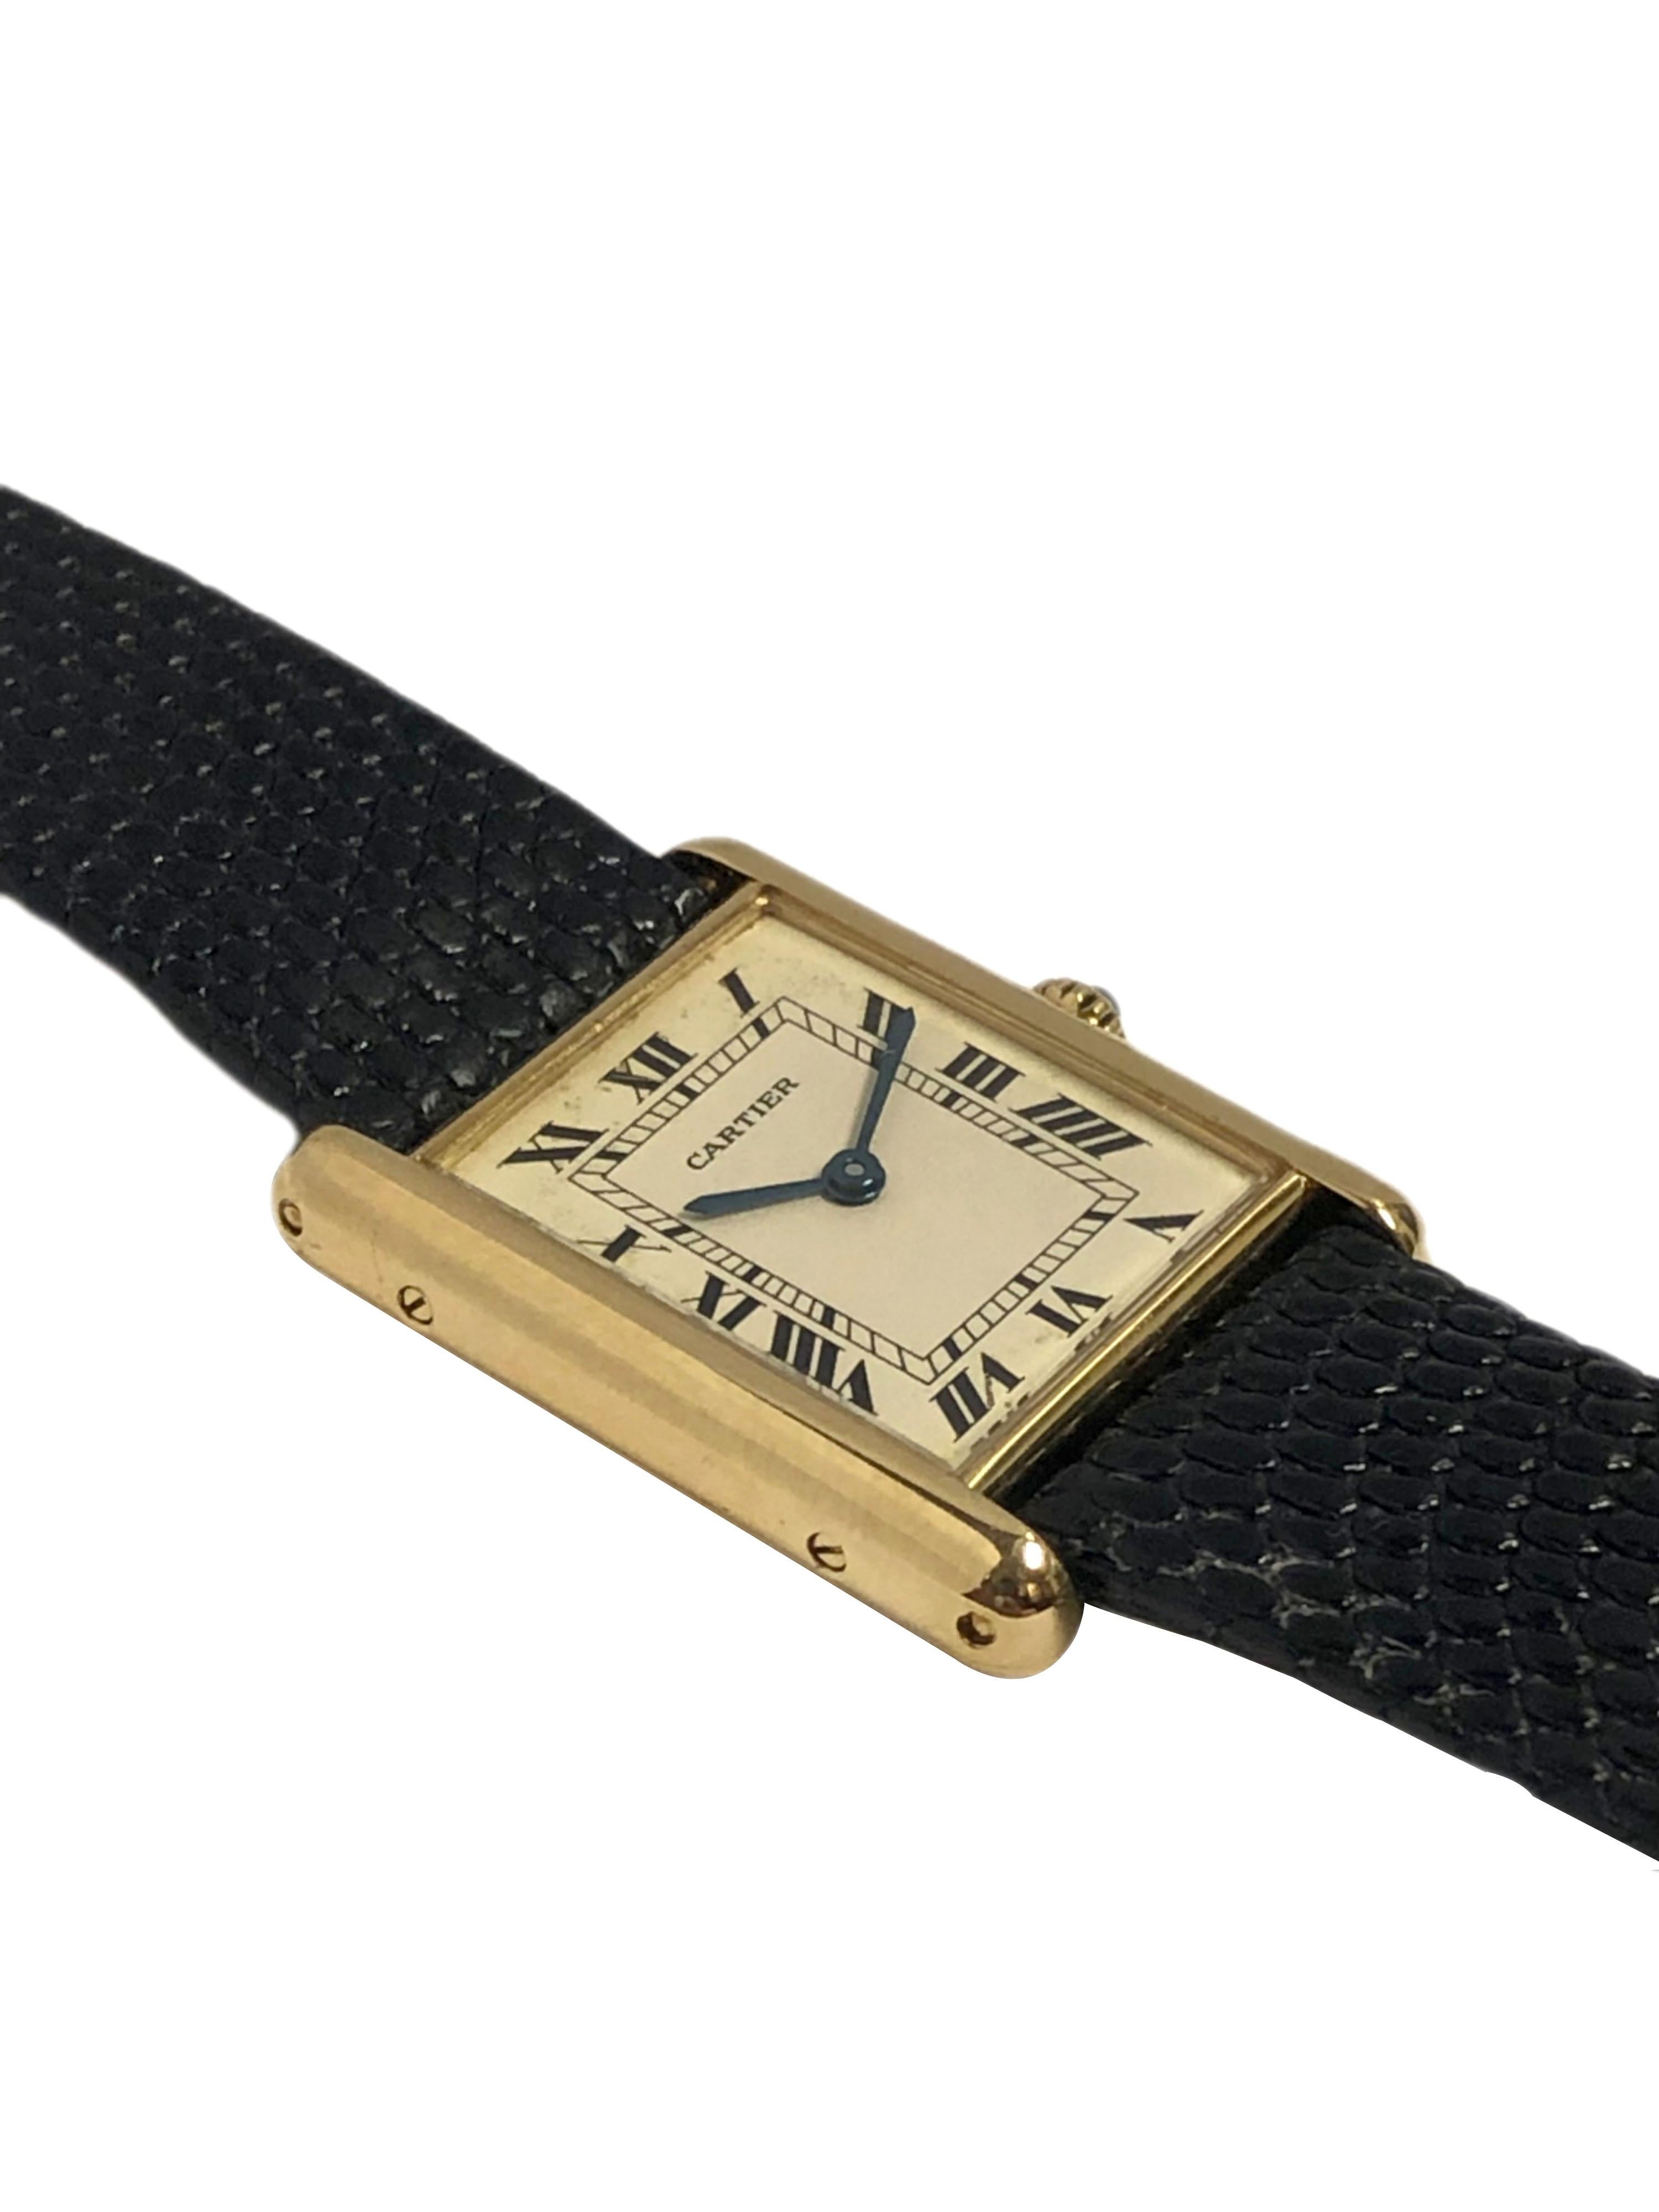 Circa 1990 Cartier Classic Tank mid size Wrist Watch, 30 X 23 M.M. 18K Yellow Gold 2 Piece case, quartz movement, silvered dial with Black Roman numerals, Sapphire Crown. New Black Lizard strap with Gold Plate Cartier Tang Buckle. Watch length 8 1/4